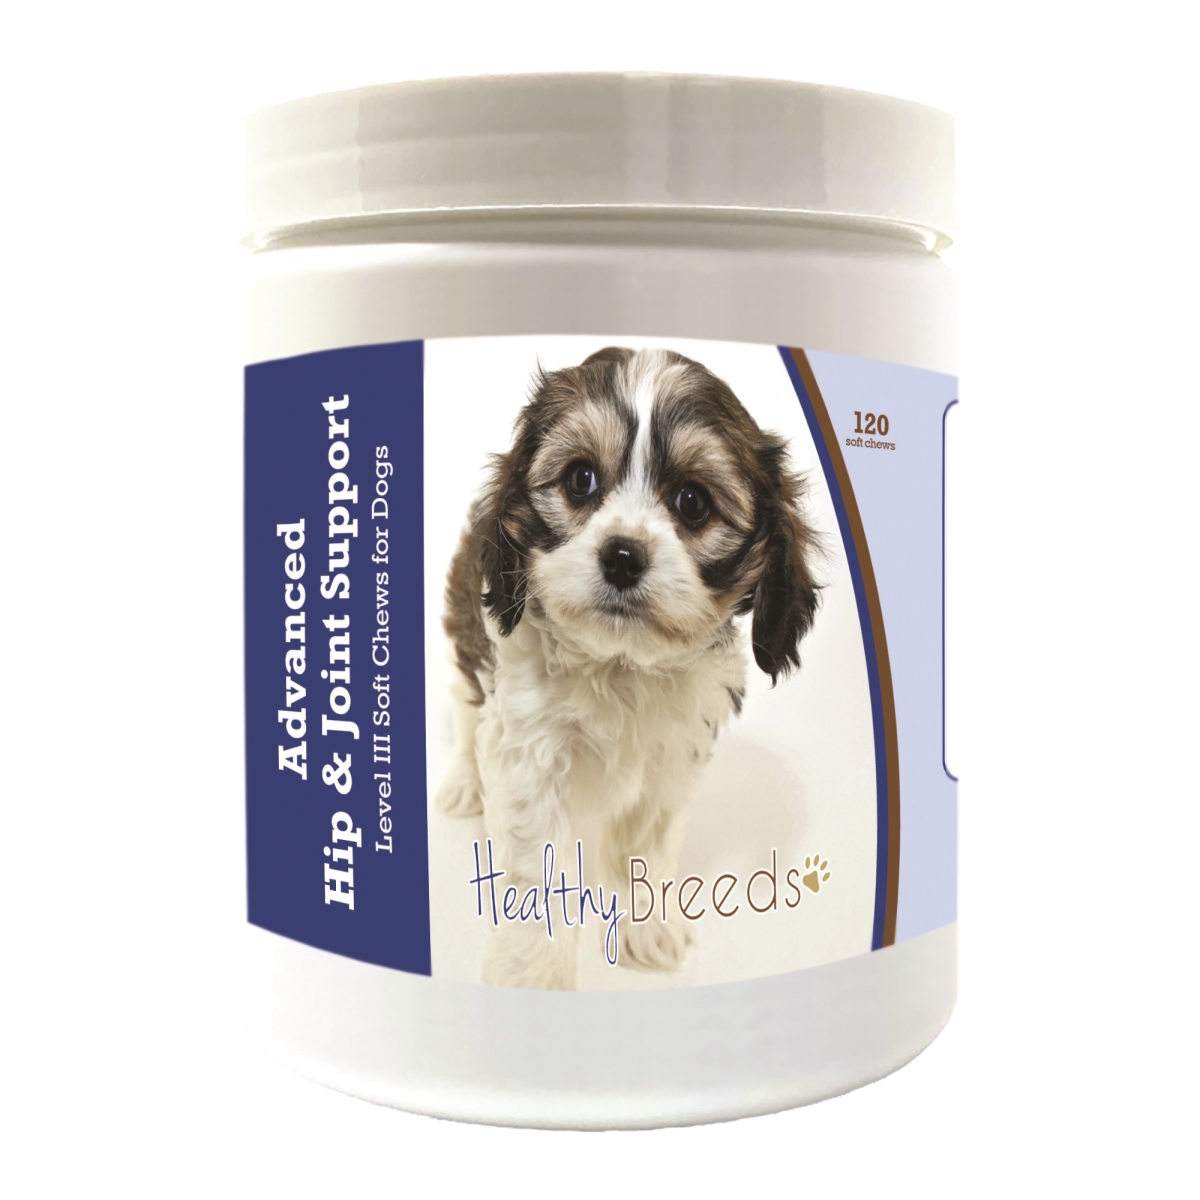 Picture of Healthy Breeds 192959897869 Cavachon Advanced Hip & Joint Support Level III Soft Chews for Dogs